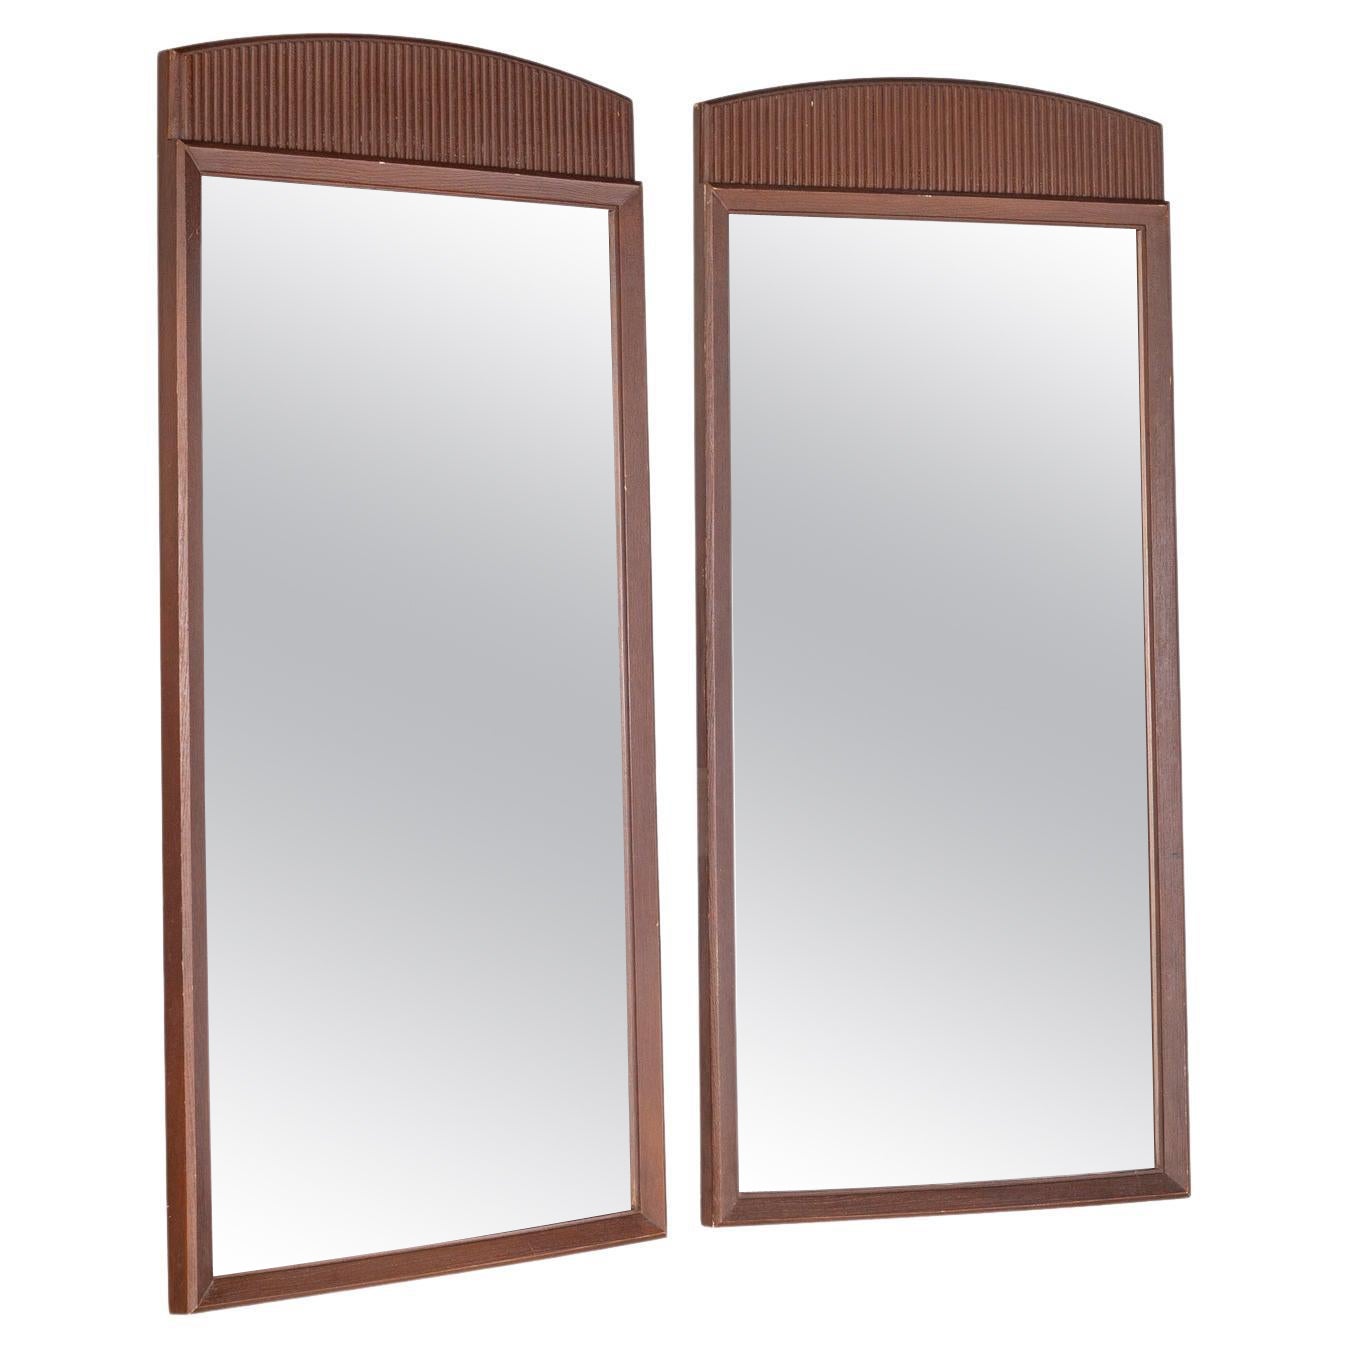 Lane First Edition Mid-Century Walnut Mirror, a Pair For Sale